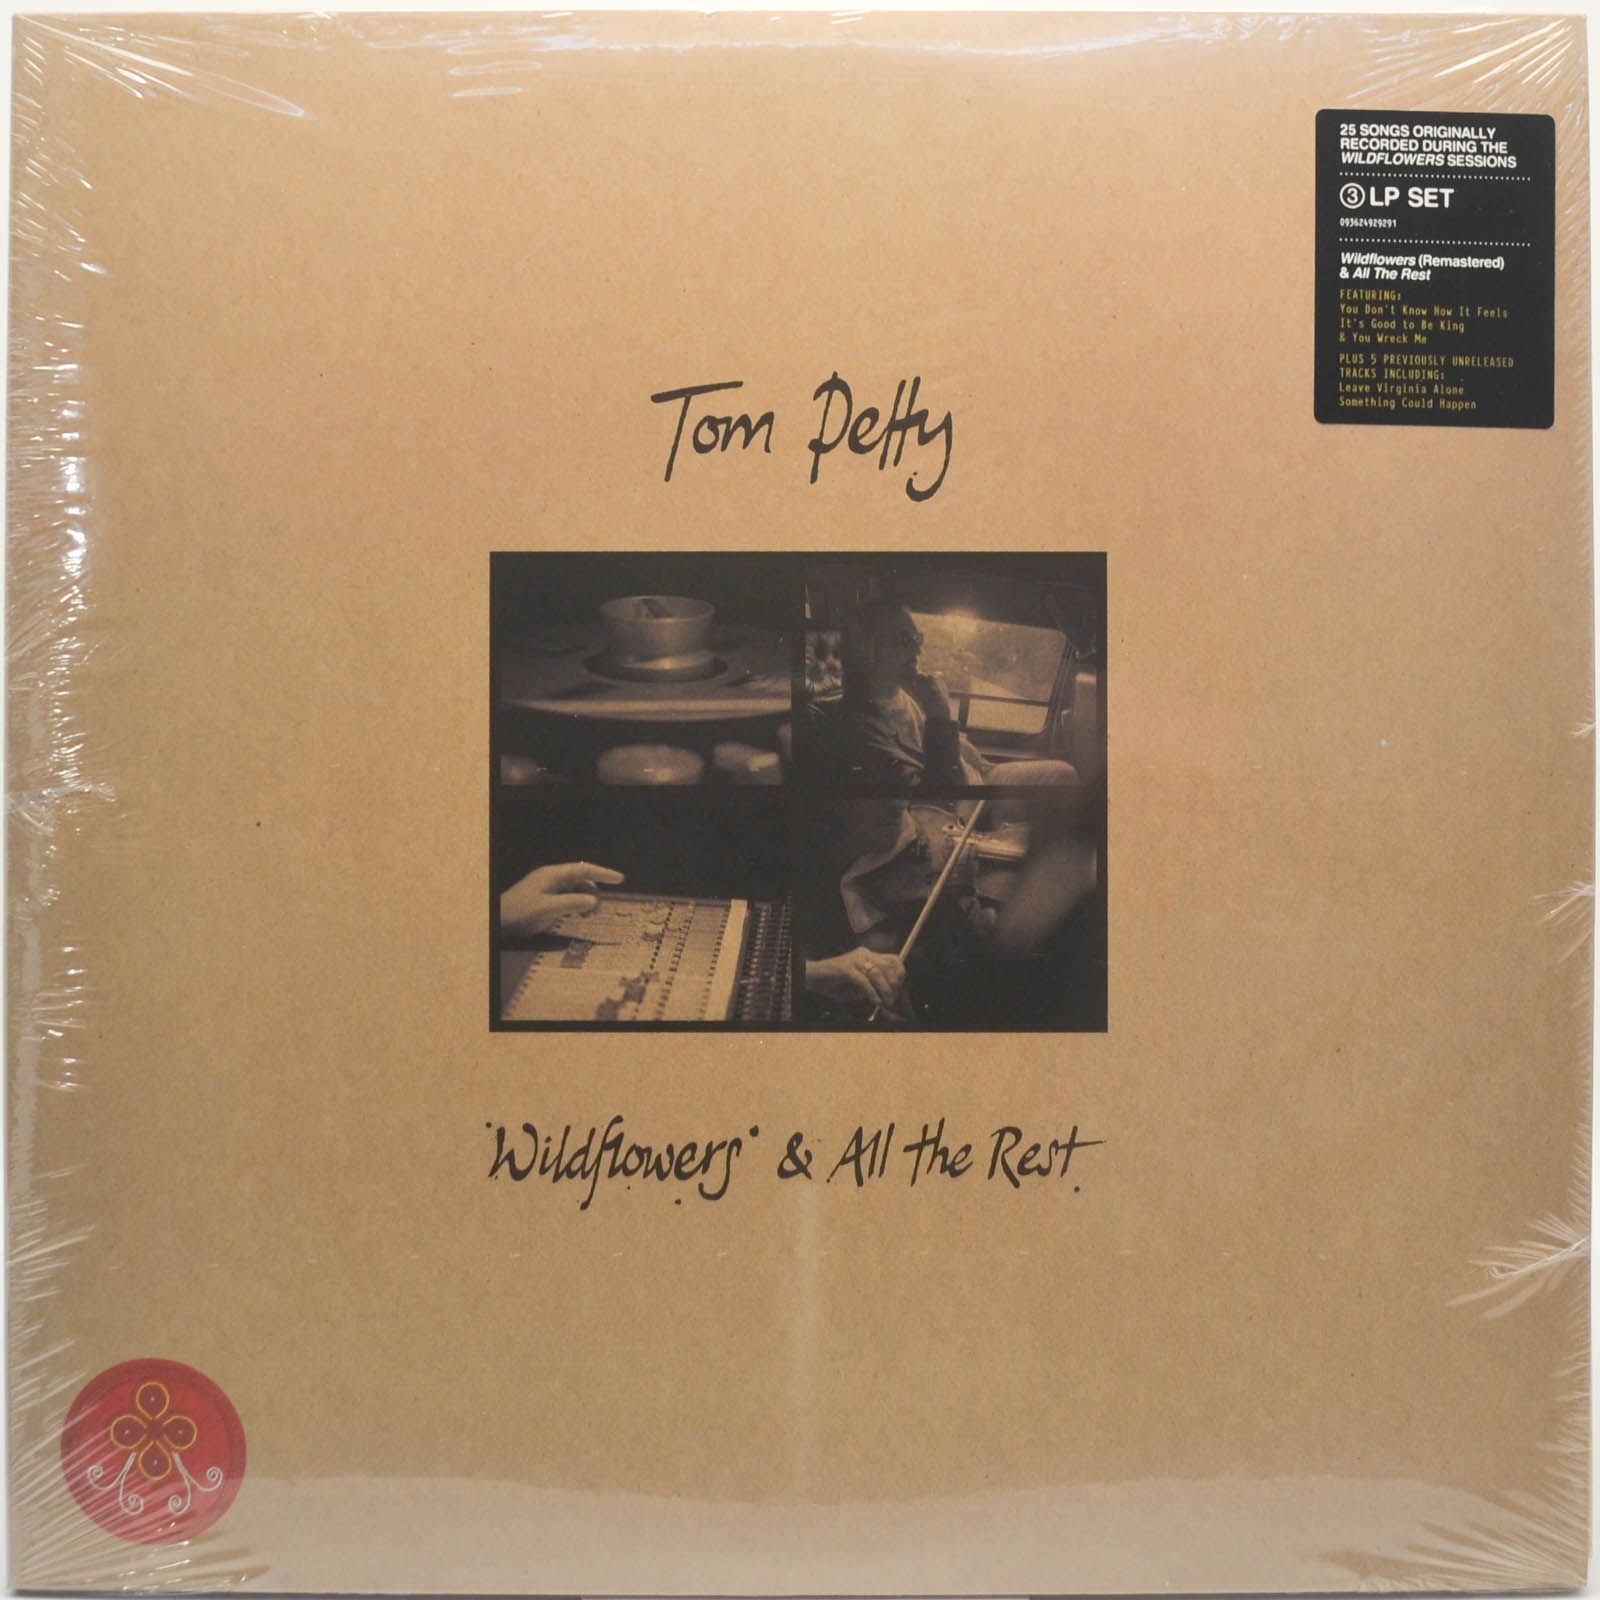 Tom Petty — Wildflowers & All The Rest (3LP), 1994